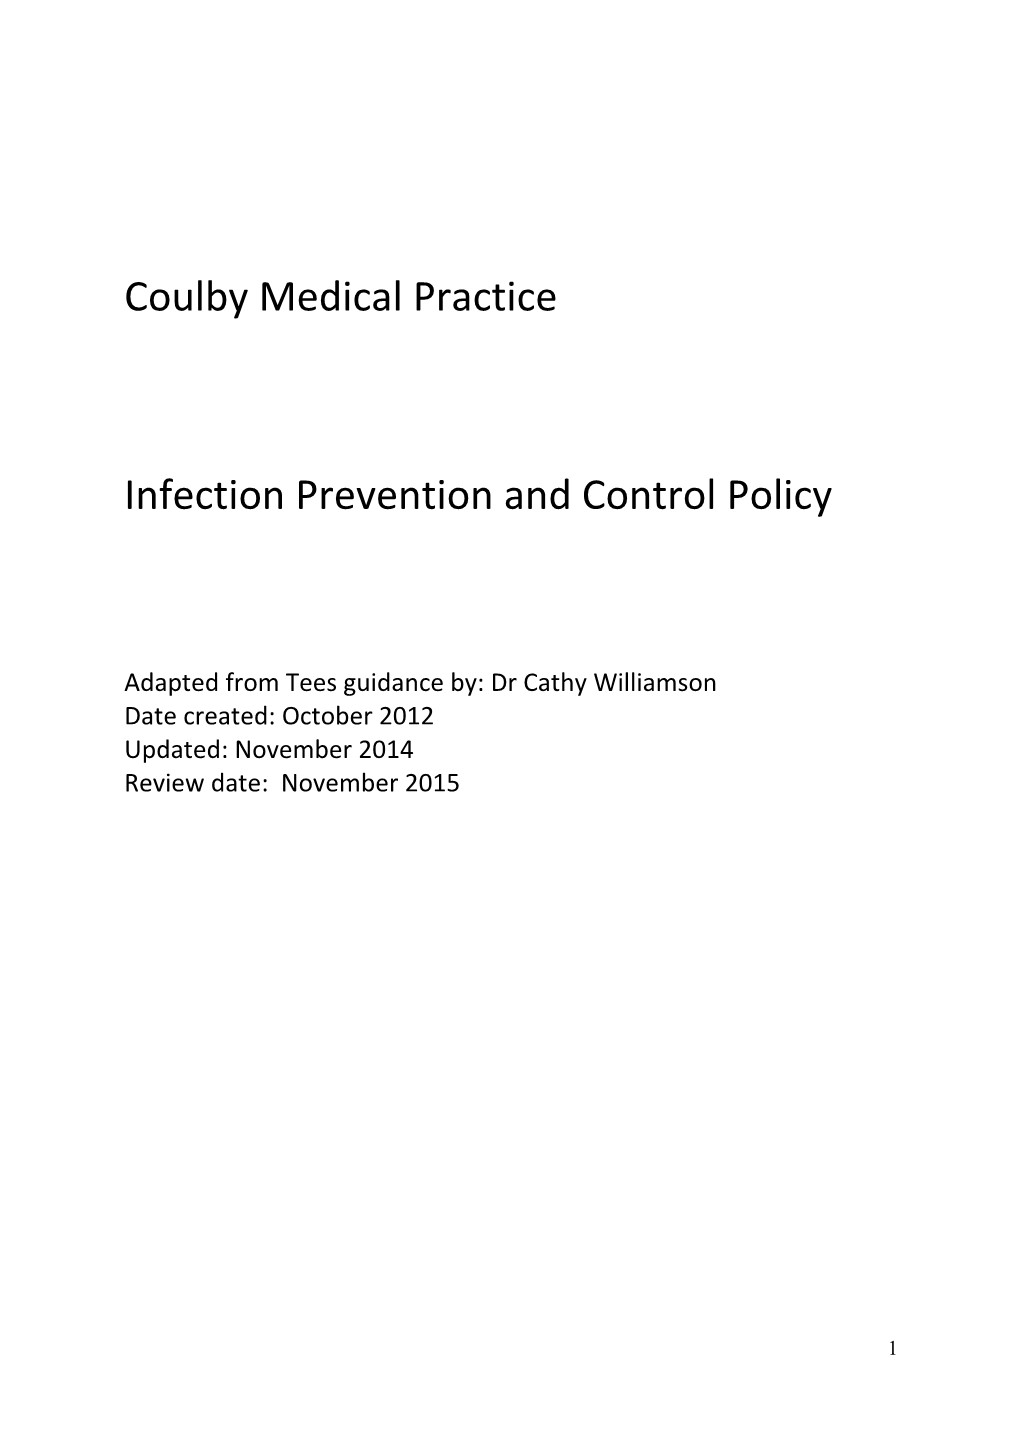 Infection Prevention and Control Policy